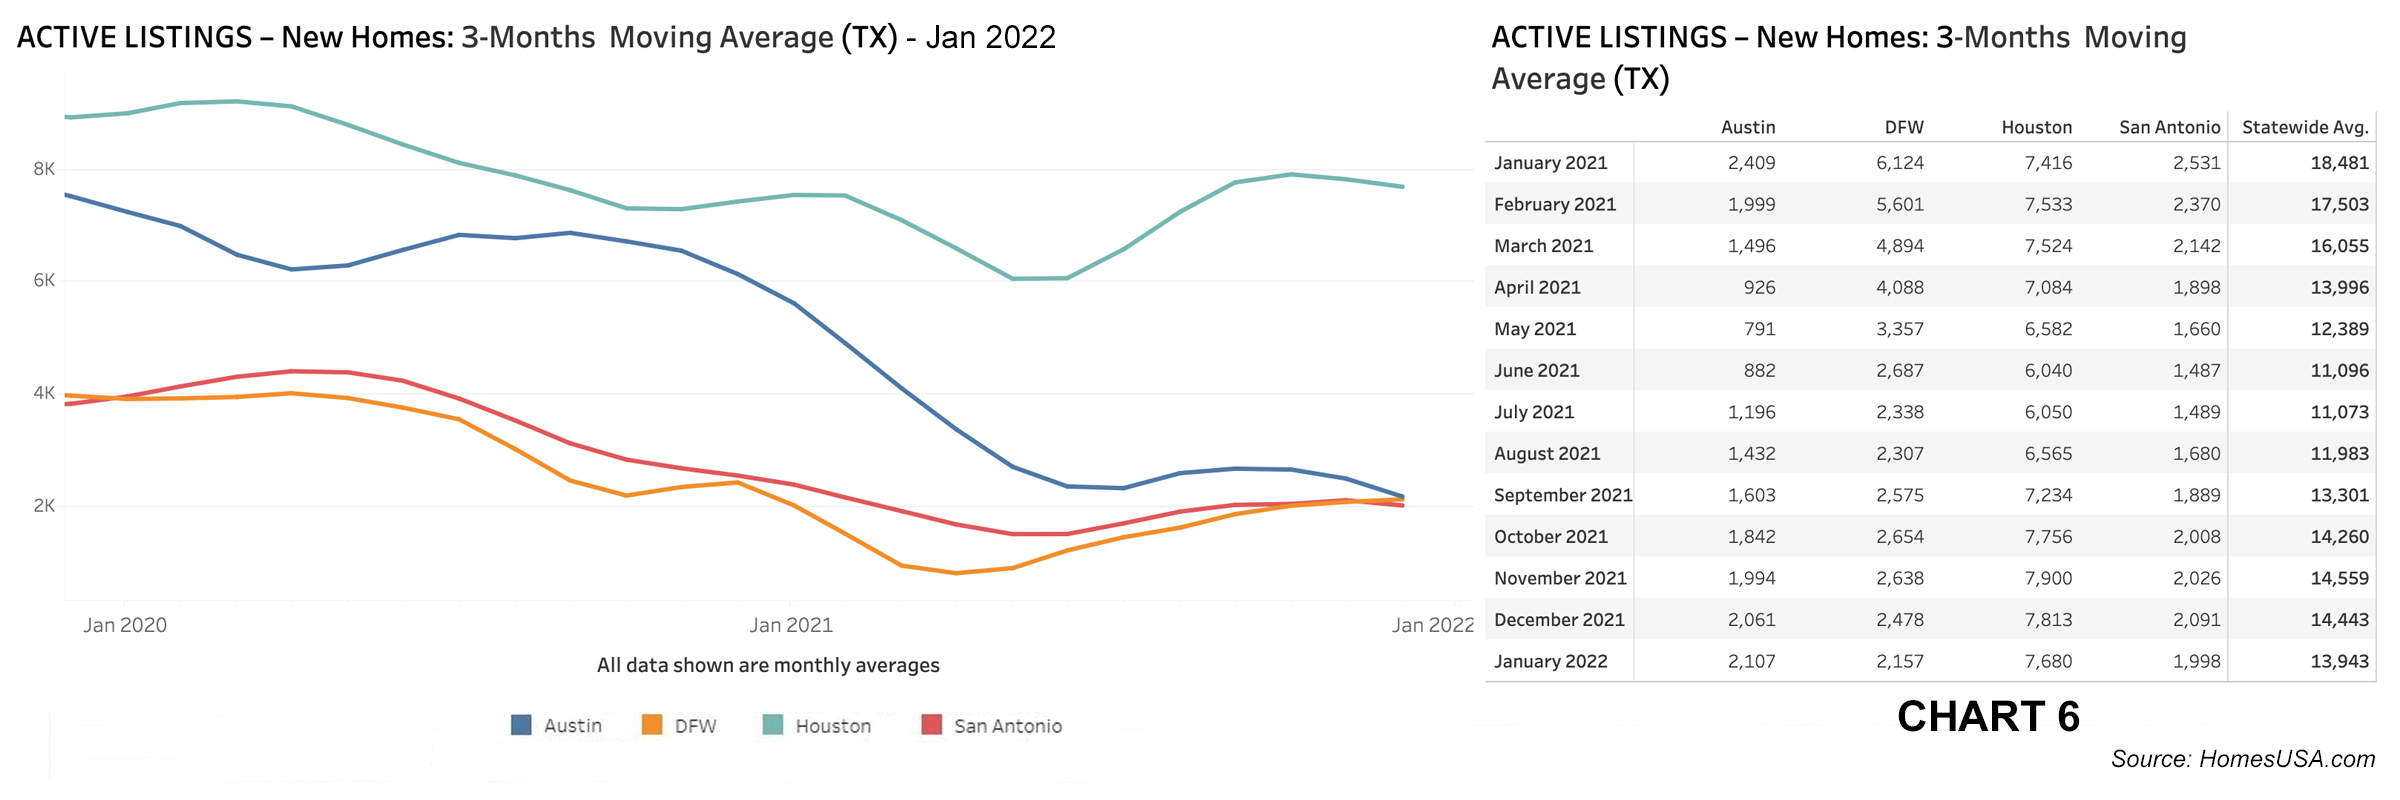 Chart 6: Texas Active Listings for New Homes – January 2022